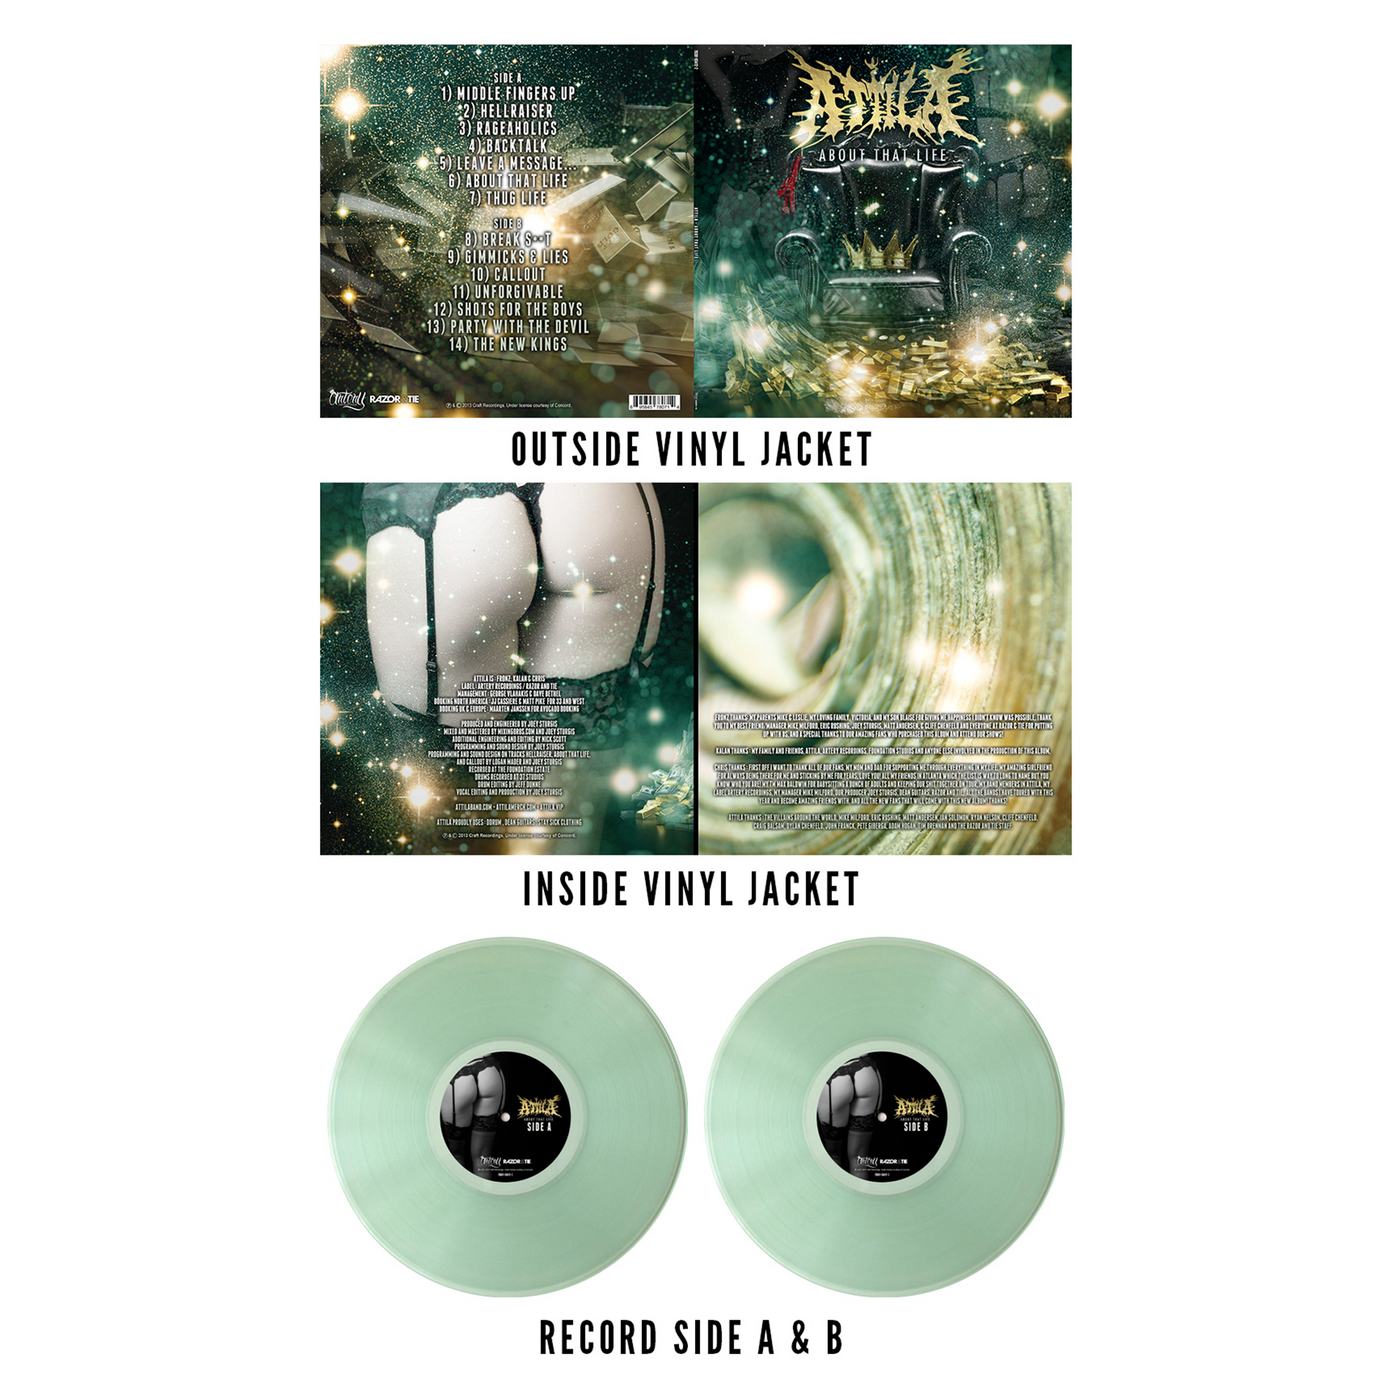 About That Life LP - Coke Bottle Green - Limited to 700 (Pre-Order)